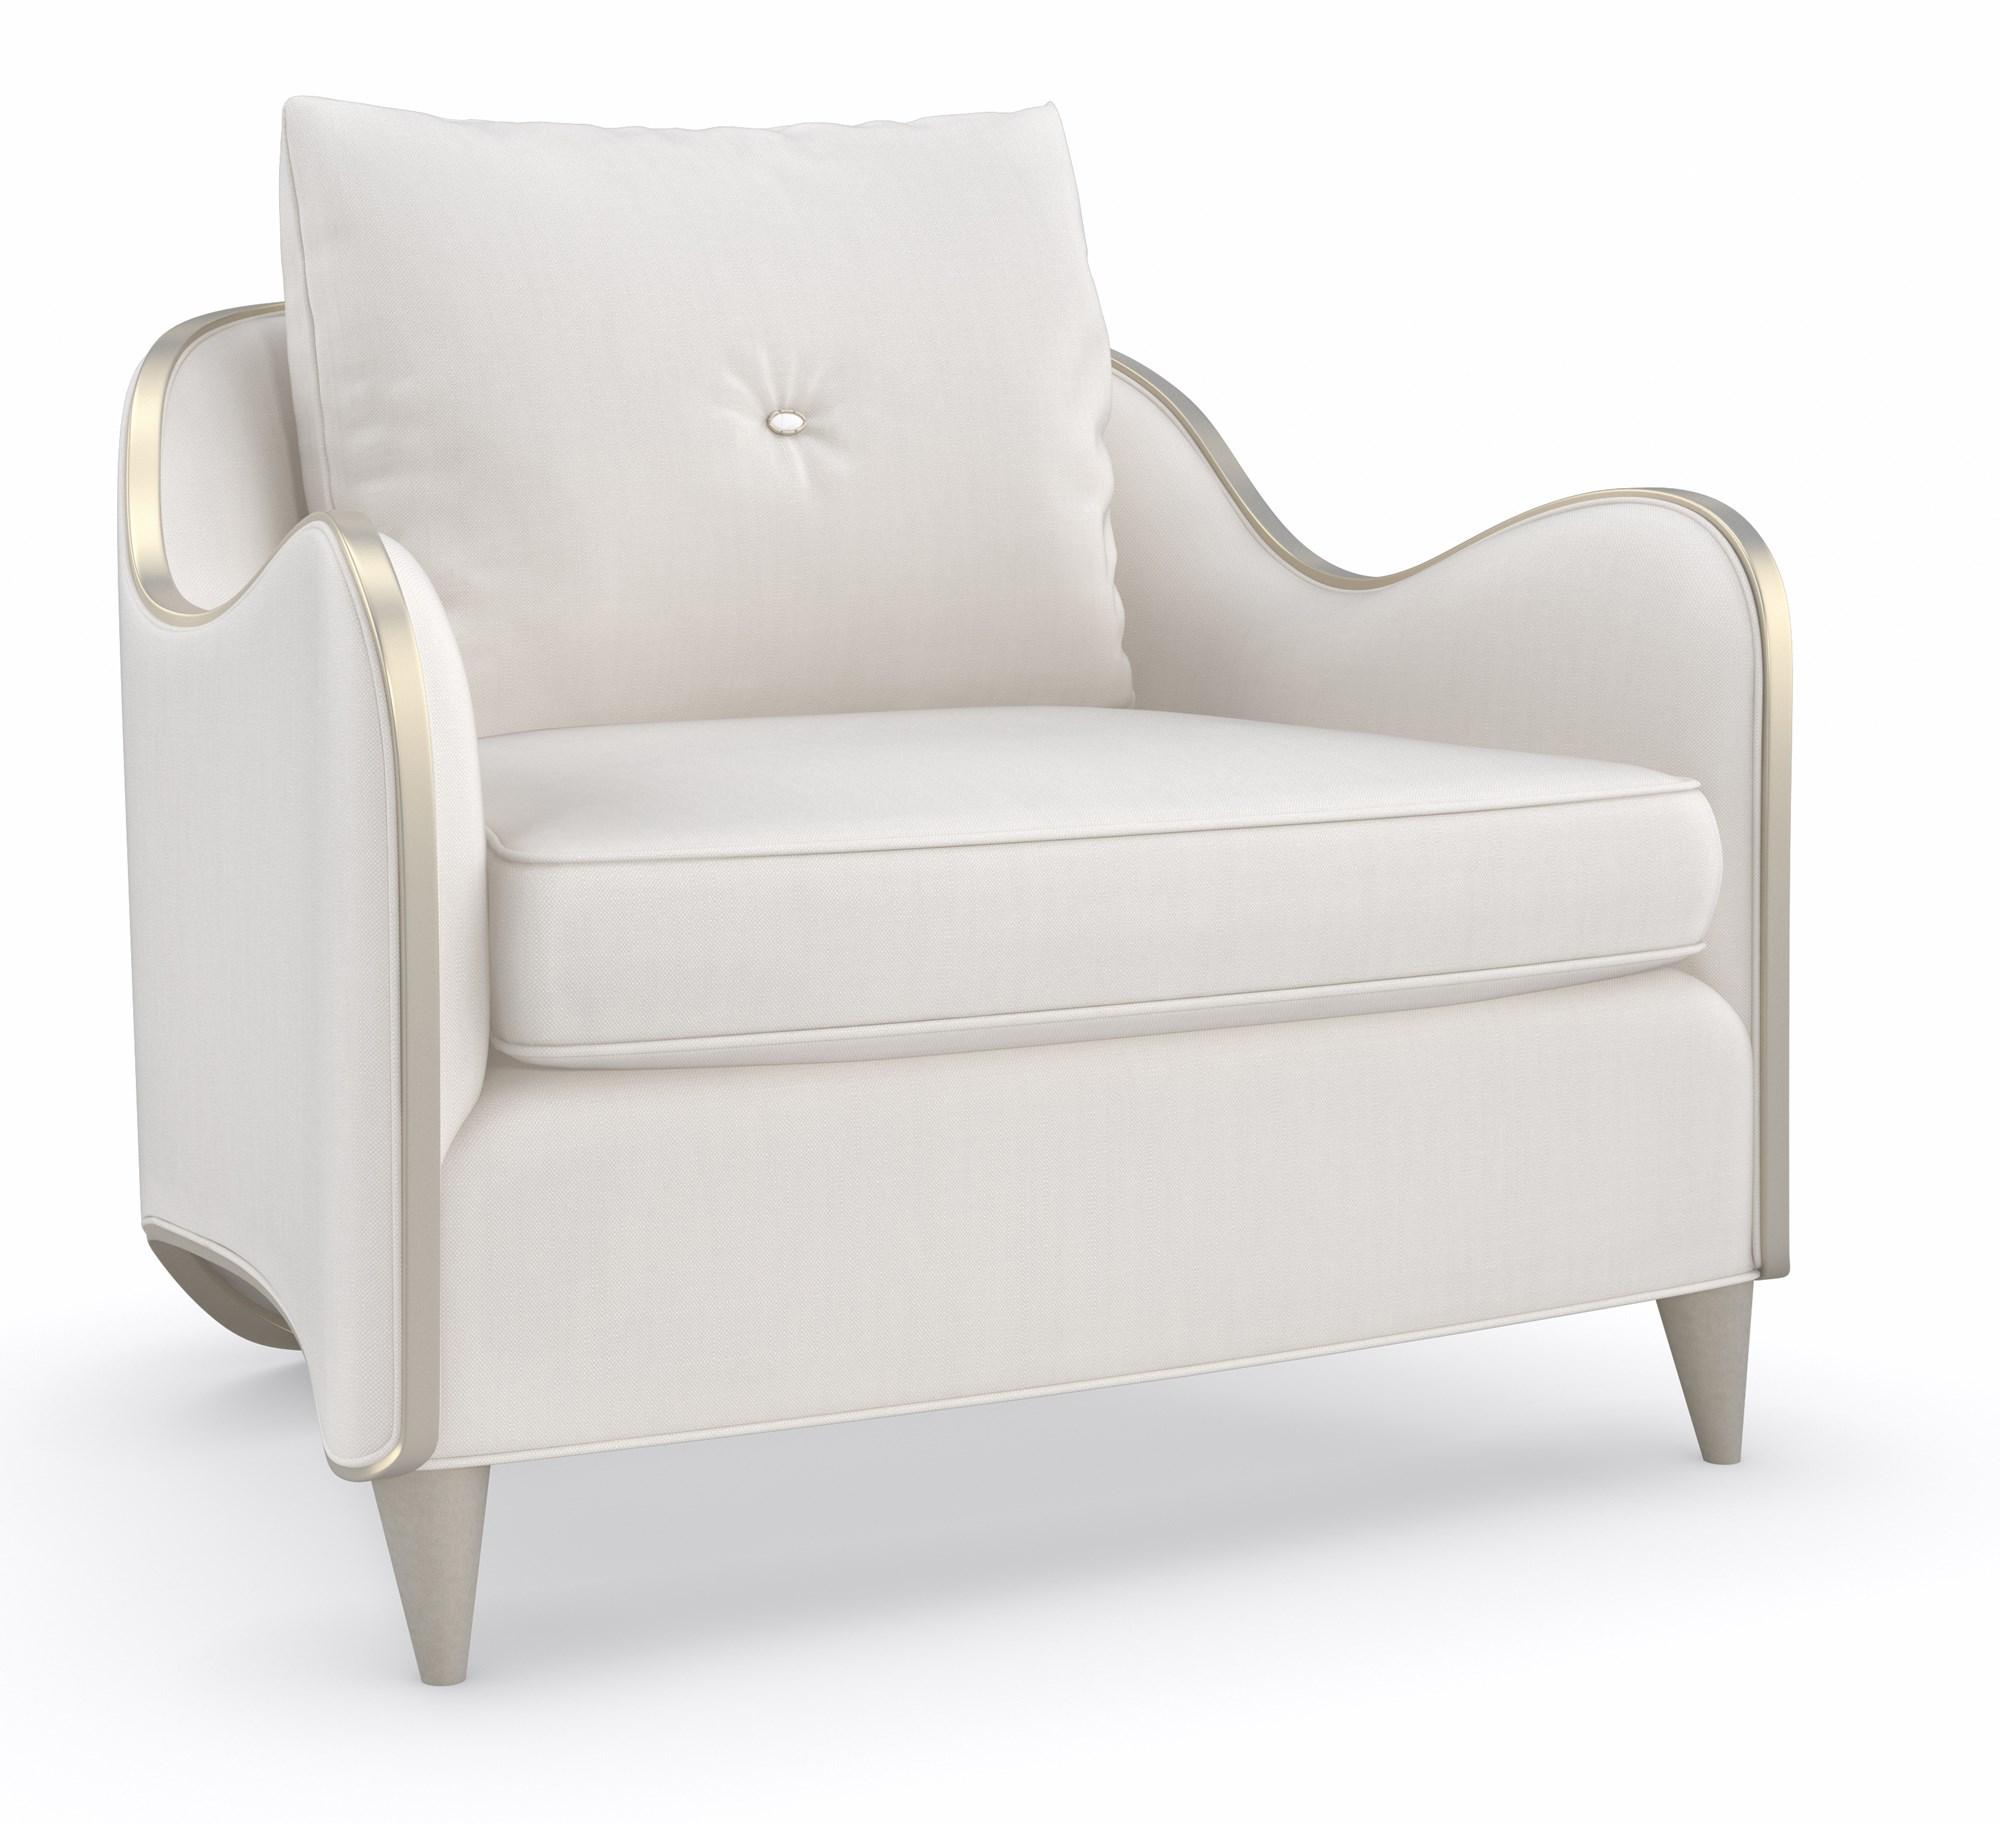 Traditional Arm Chairs LILLIAN C090-020-031-A in Ivory Fabric